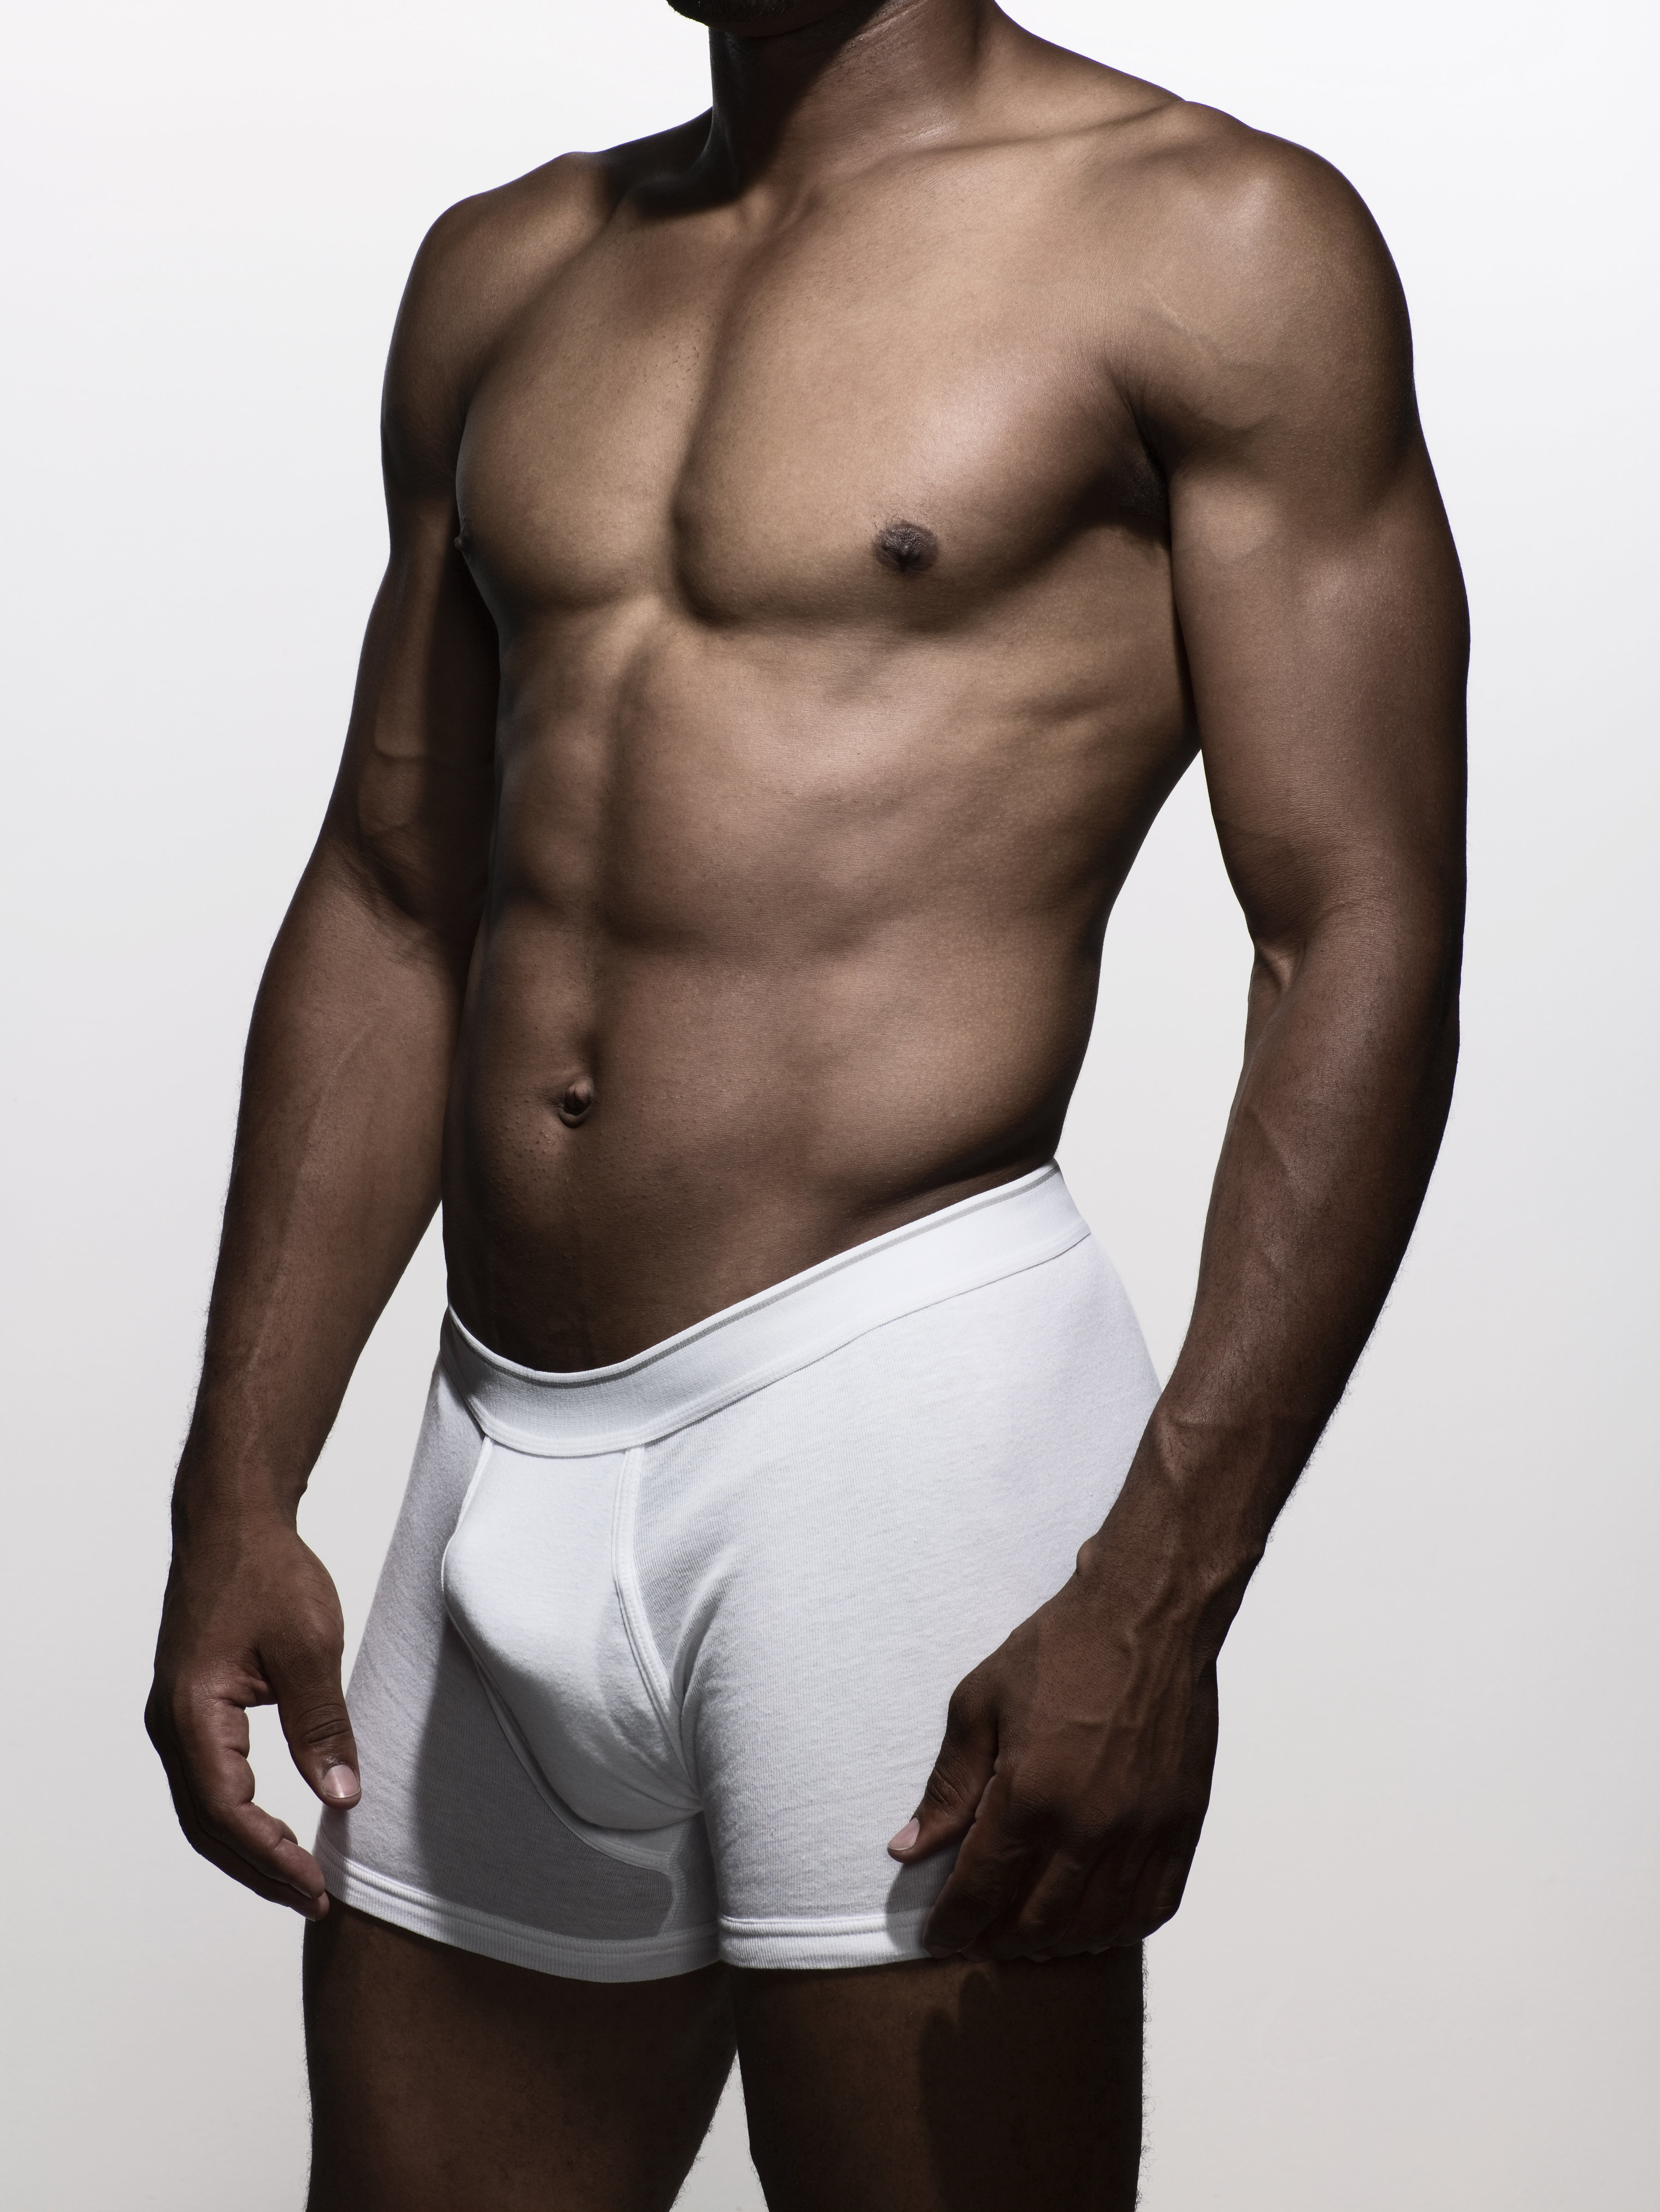 Olivia Cunning Pin on male models You Prefer Your Guy in Boxers or Briefs P...